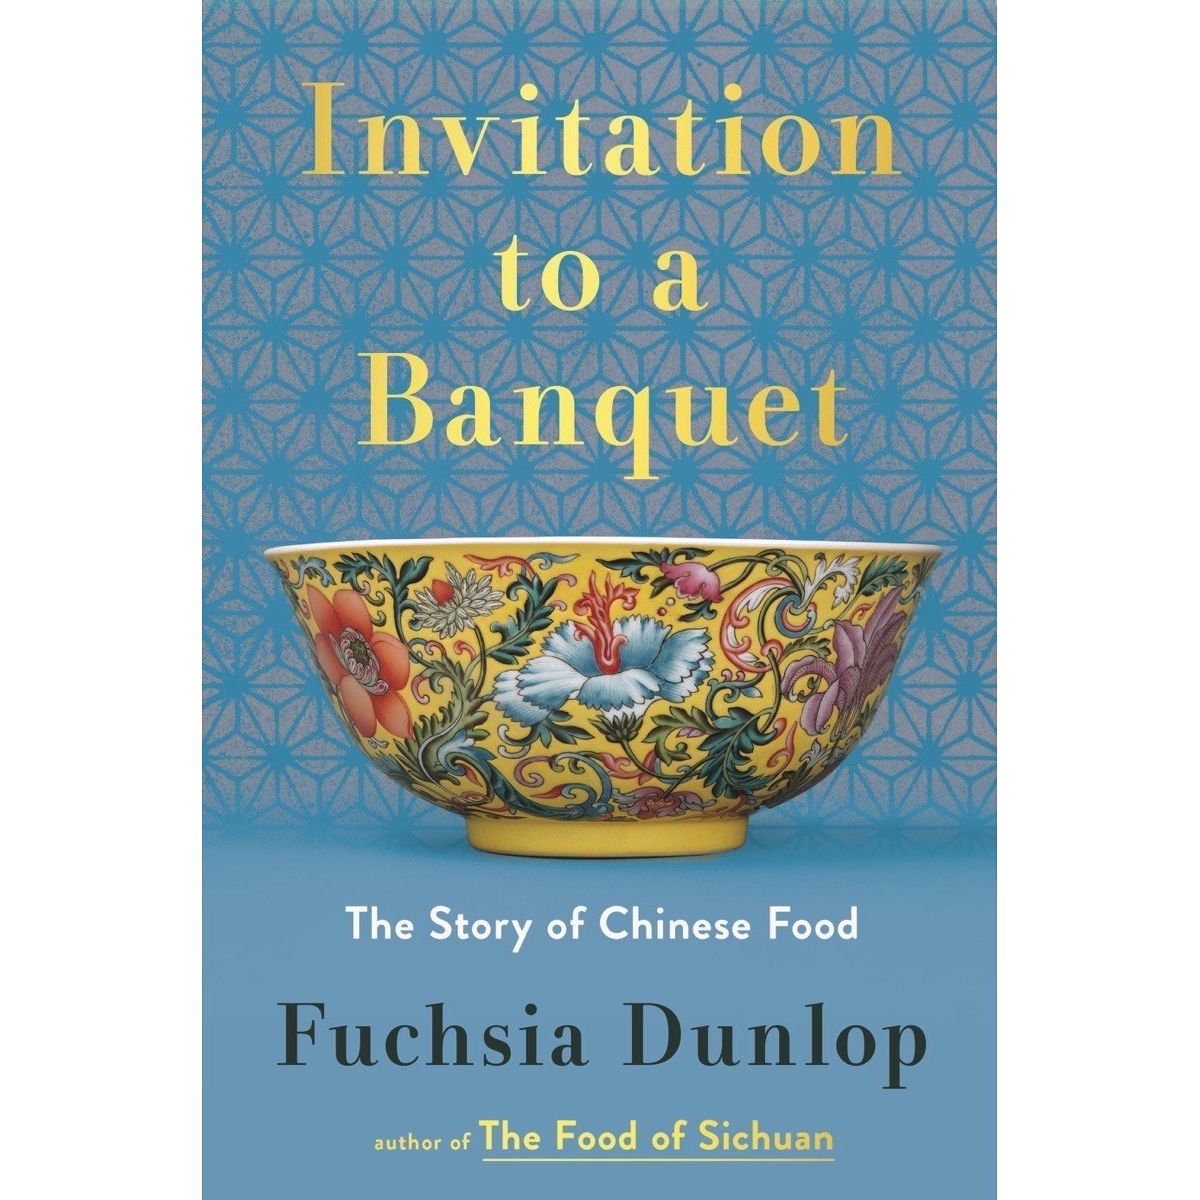 SIGNED Invitation to a Banquet : The Story of Chinese Food (Fuchsia Dunlop)